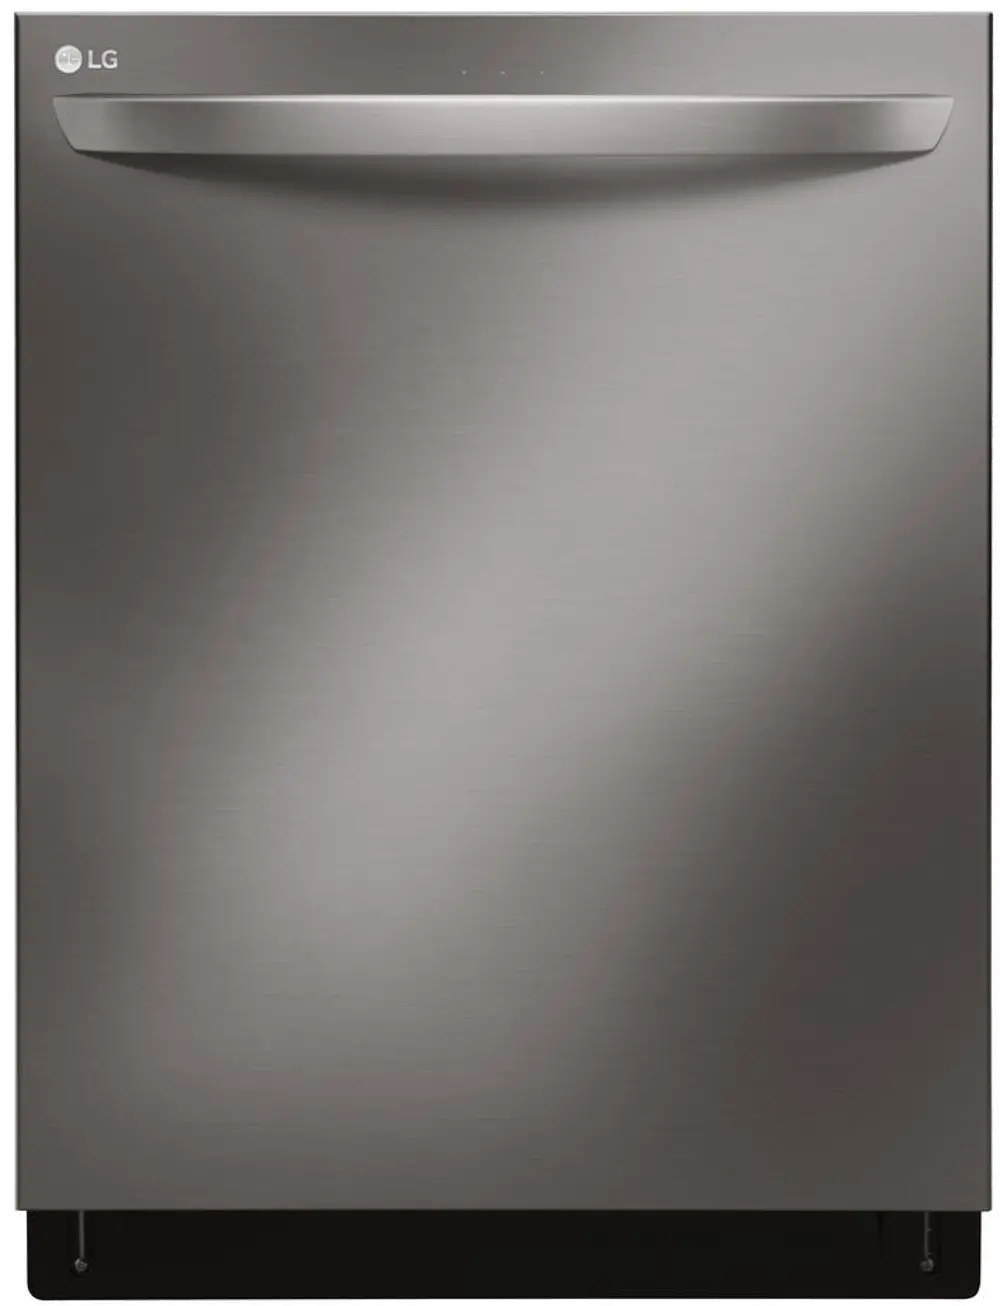 LDT7797BD LG Dishwasher with 3rd Rack - Black Stainless Steel-1